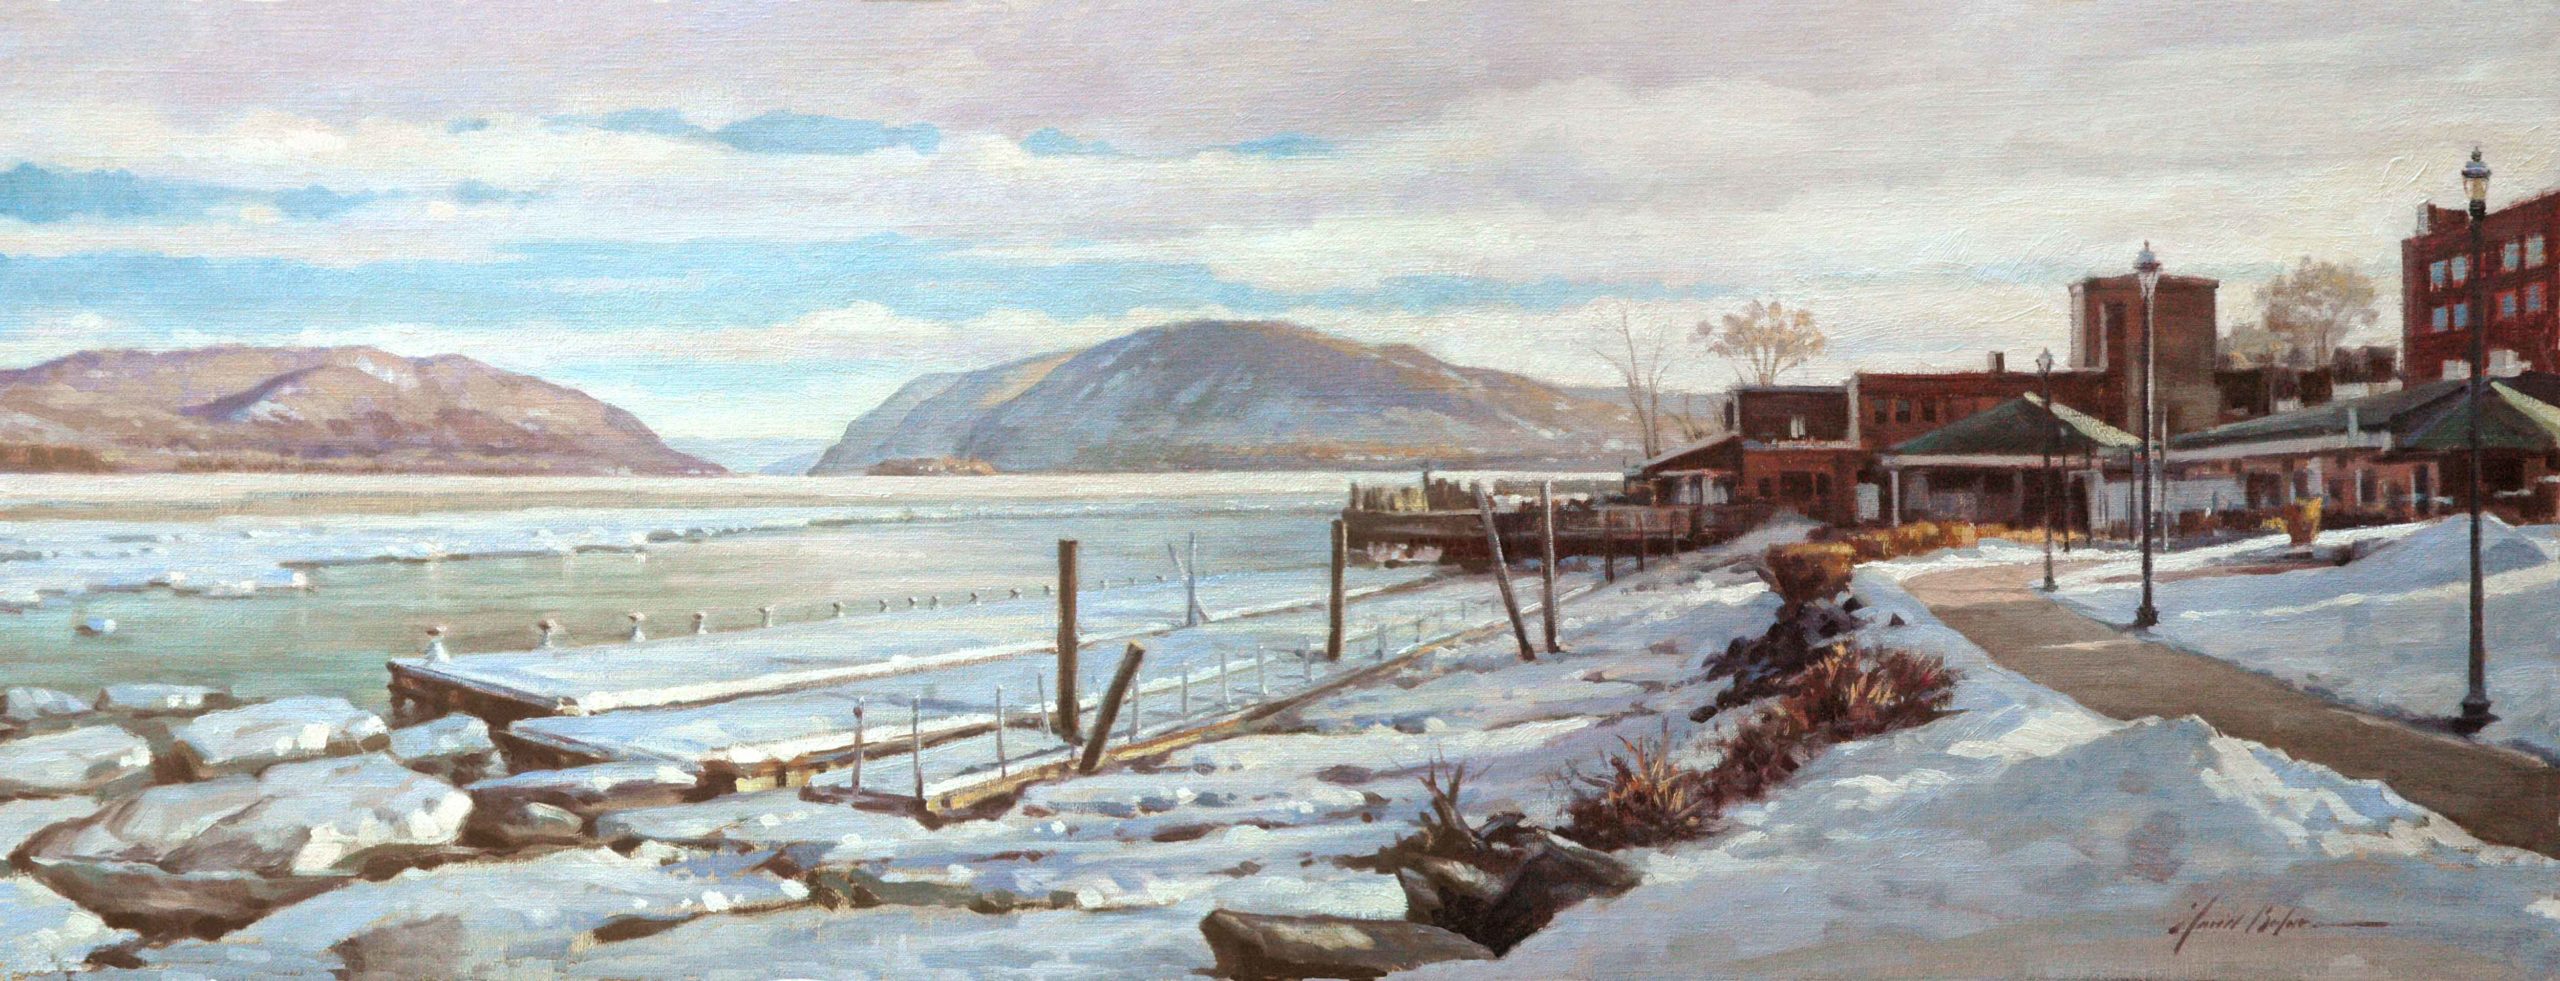 Oil painting of the Hudson River in winter